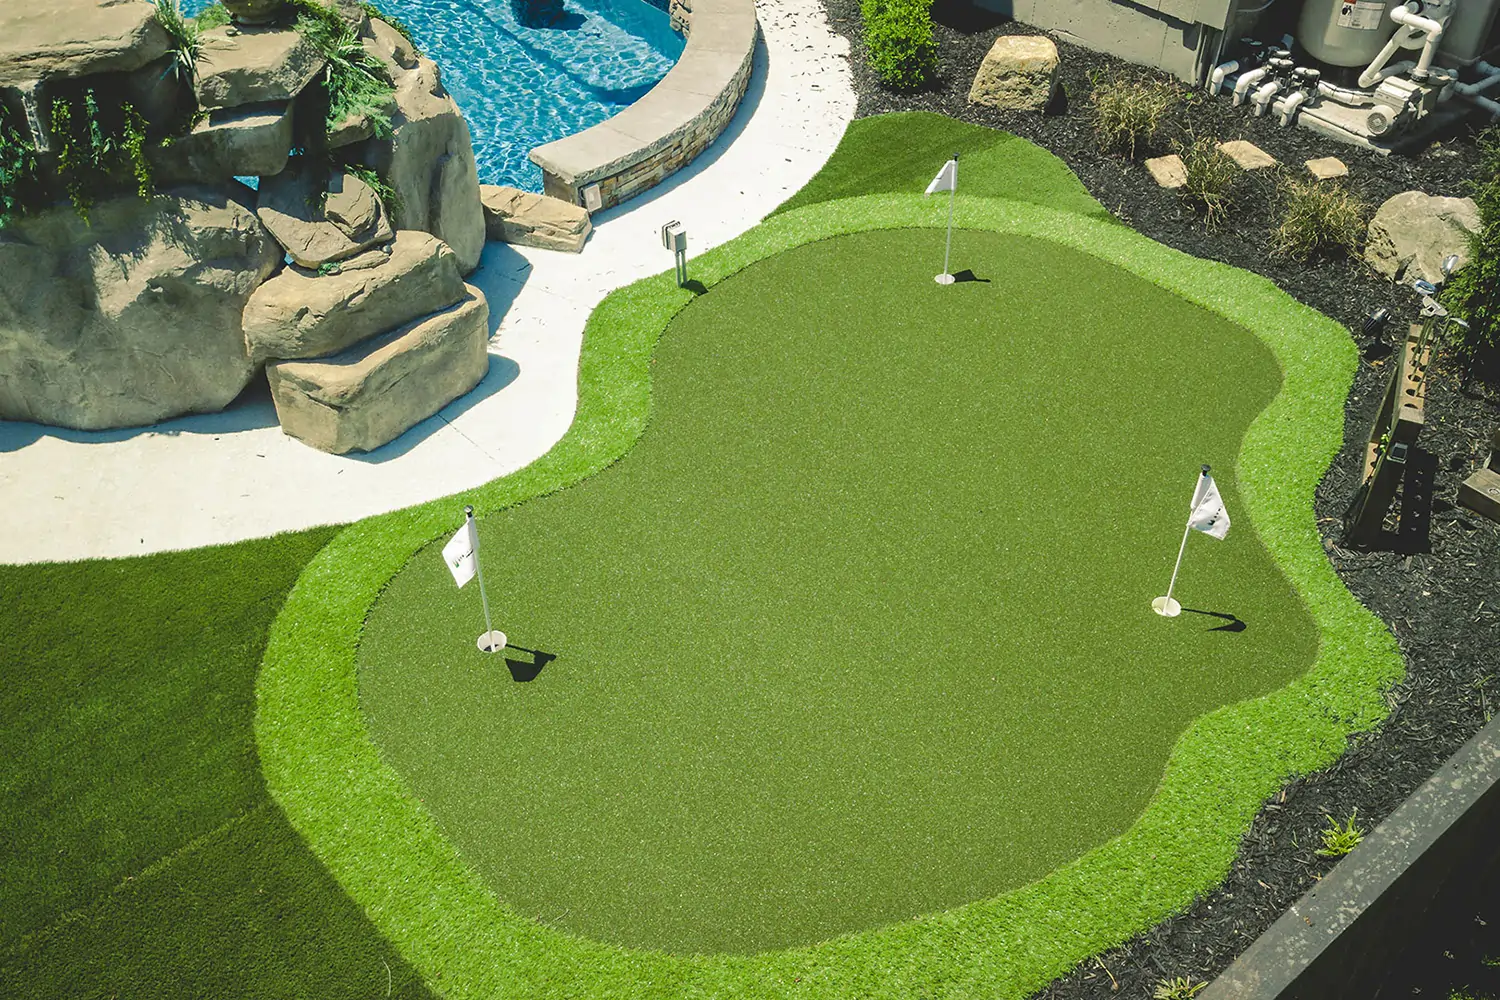 Drone shot of backyard putting green from SYNLawn